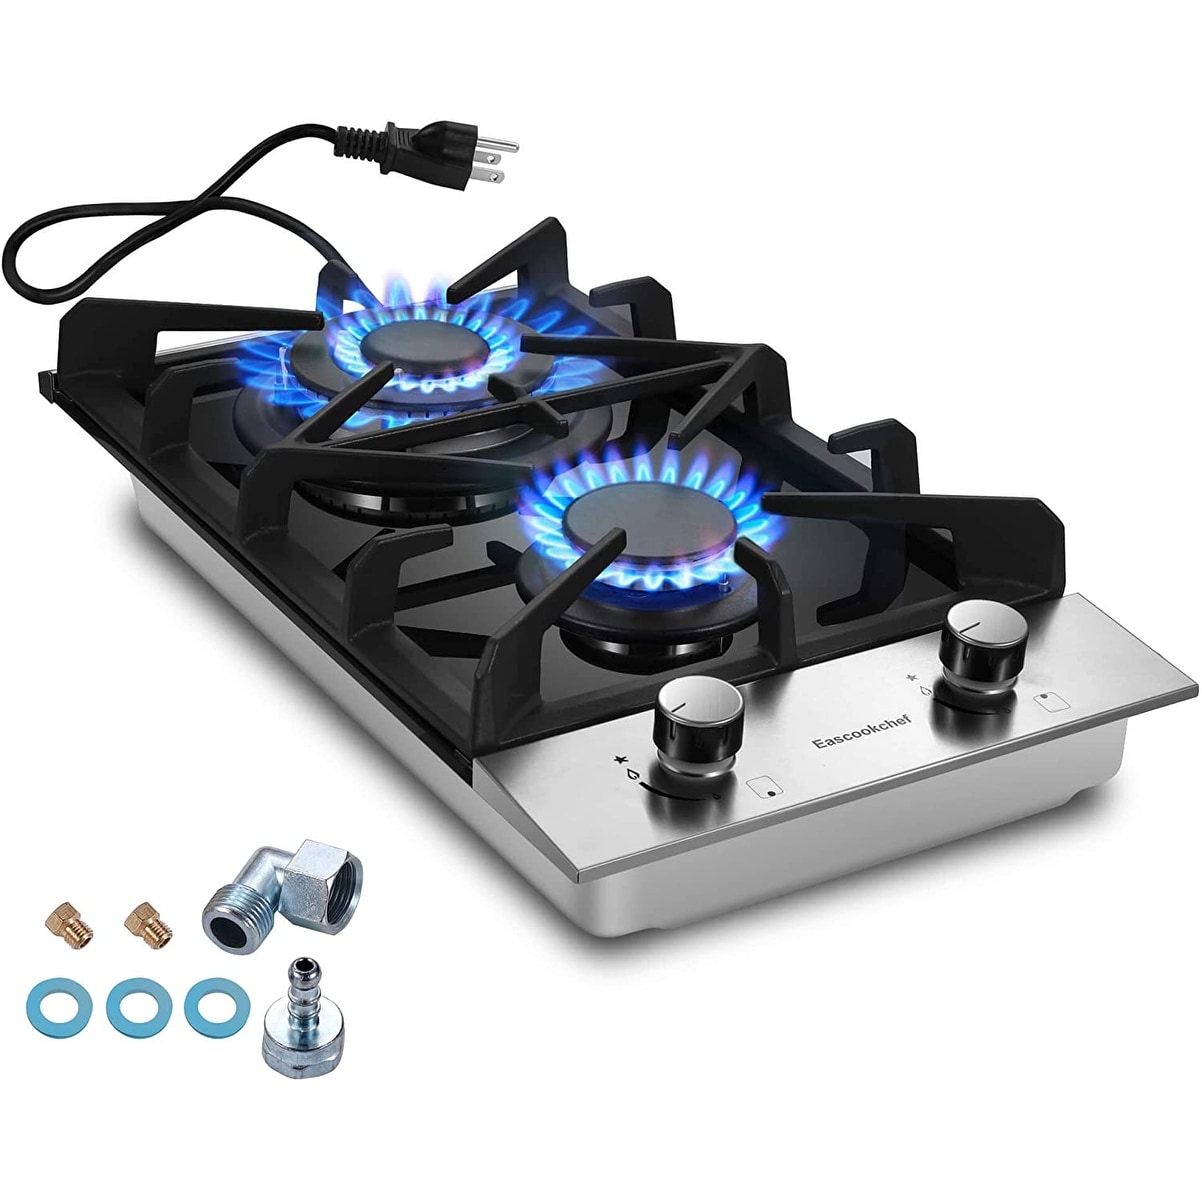 https://ak1.ostkcdn.com/images/products/is/images/direct/fce99191ecb675ae0d326d6225cfb79e84ef1abd/Gas-Cooktop-12-inch-Eascookchef%2CBulit-in-Gas-Stove-Top-2-Burners-Dual-Burner.jpg